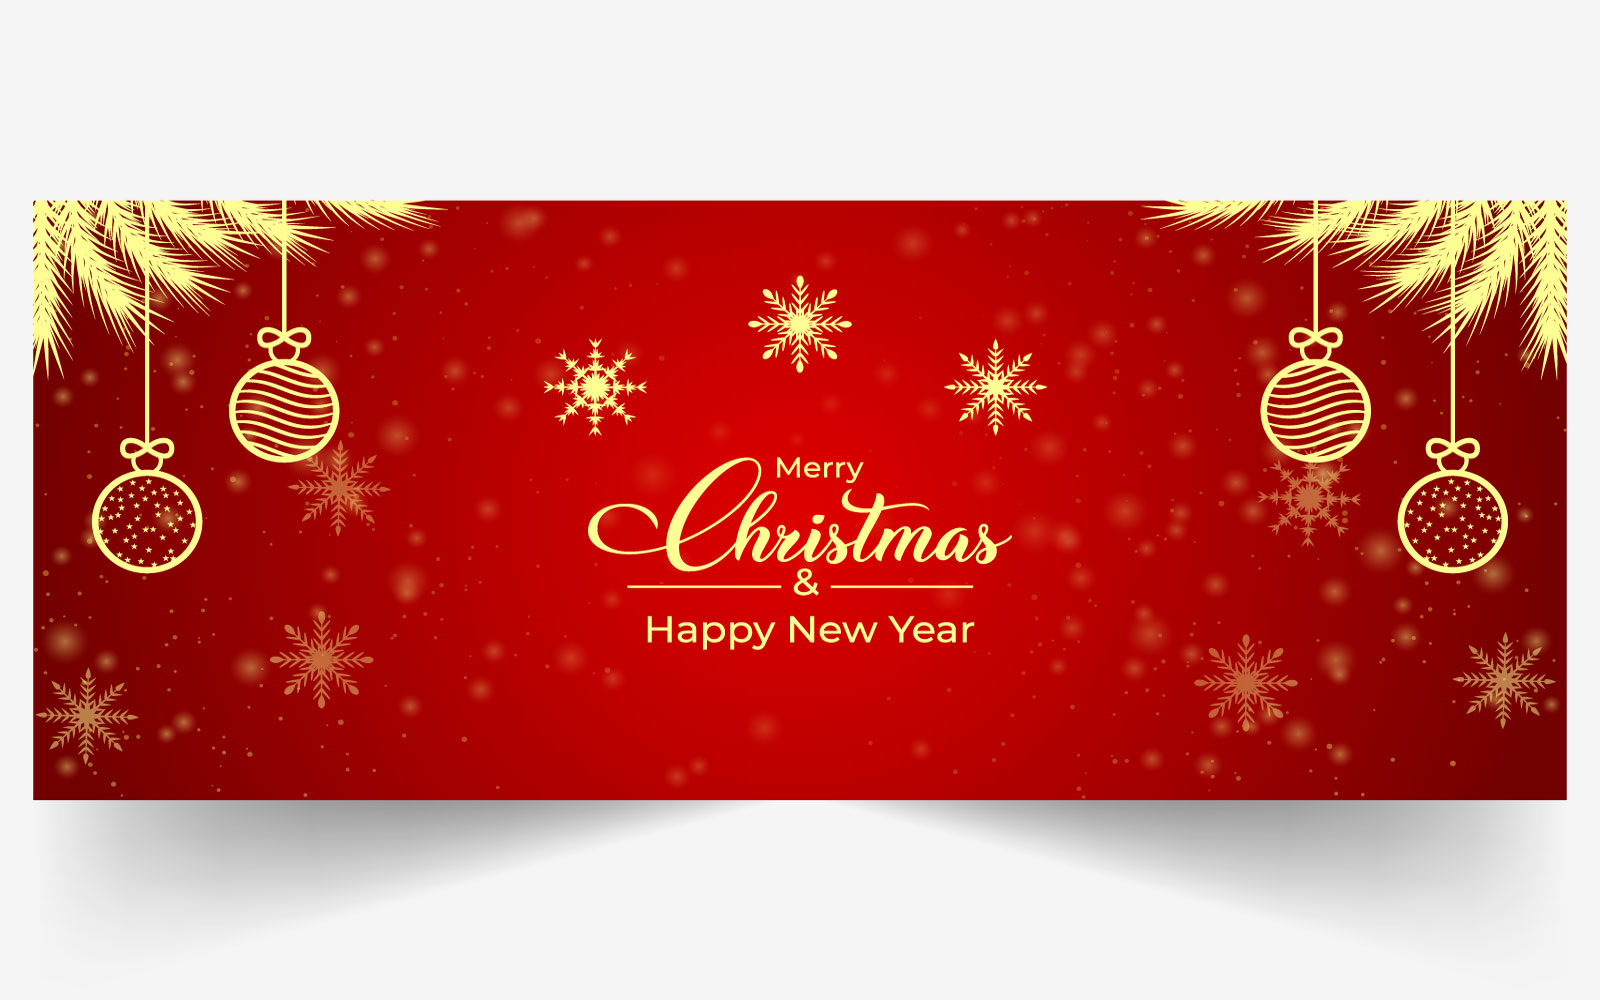 Christmas Banner with Snowflakes, Leaves